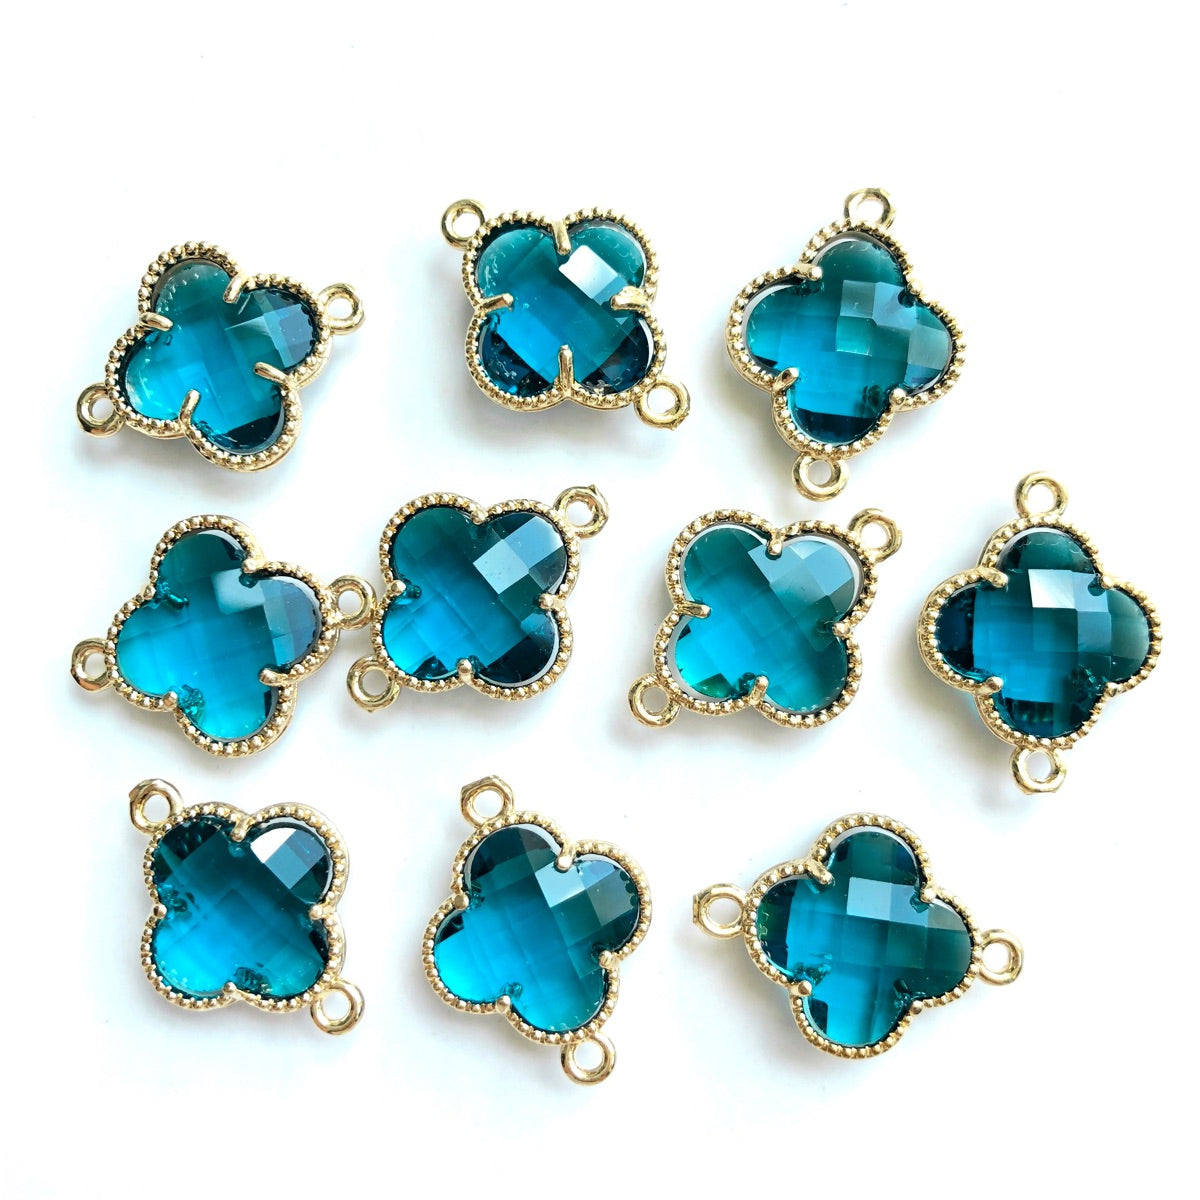 10pcs/Lot Gold Plated Glass Crystal Clover Flower Connectors Peacock Blue Stone Charms Flower Glass Beads New Charms Arrivals Charms Beads Beyond